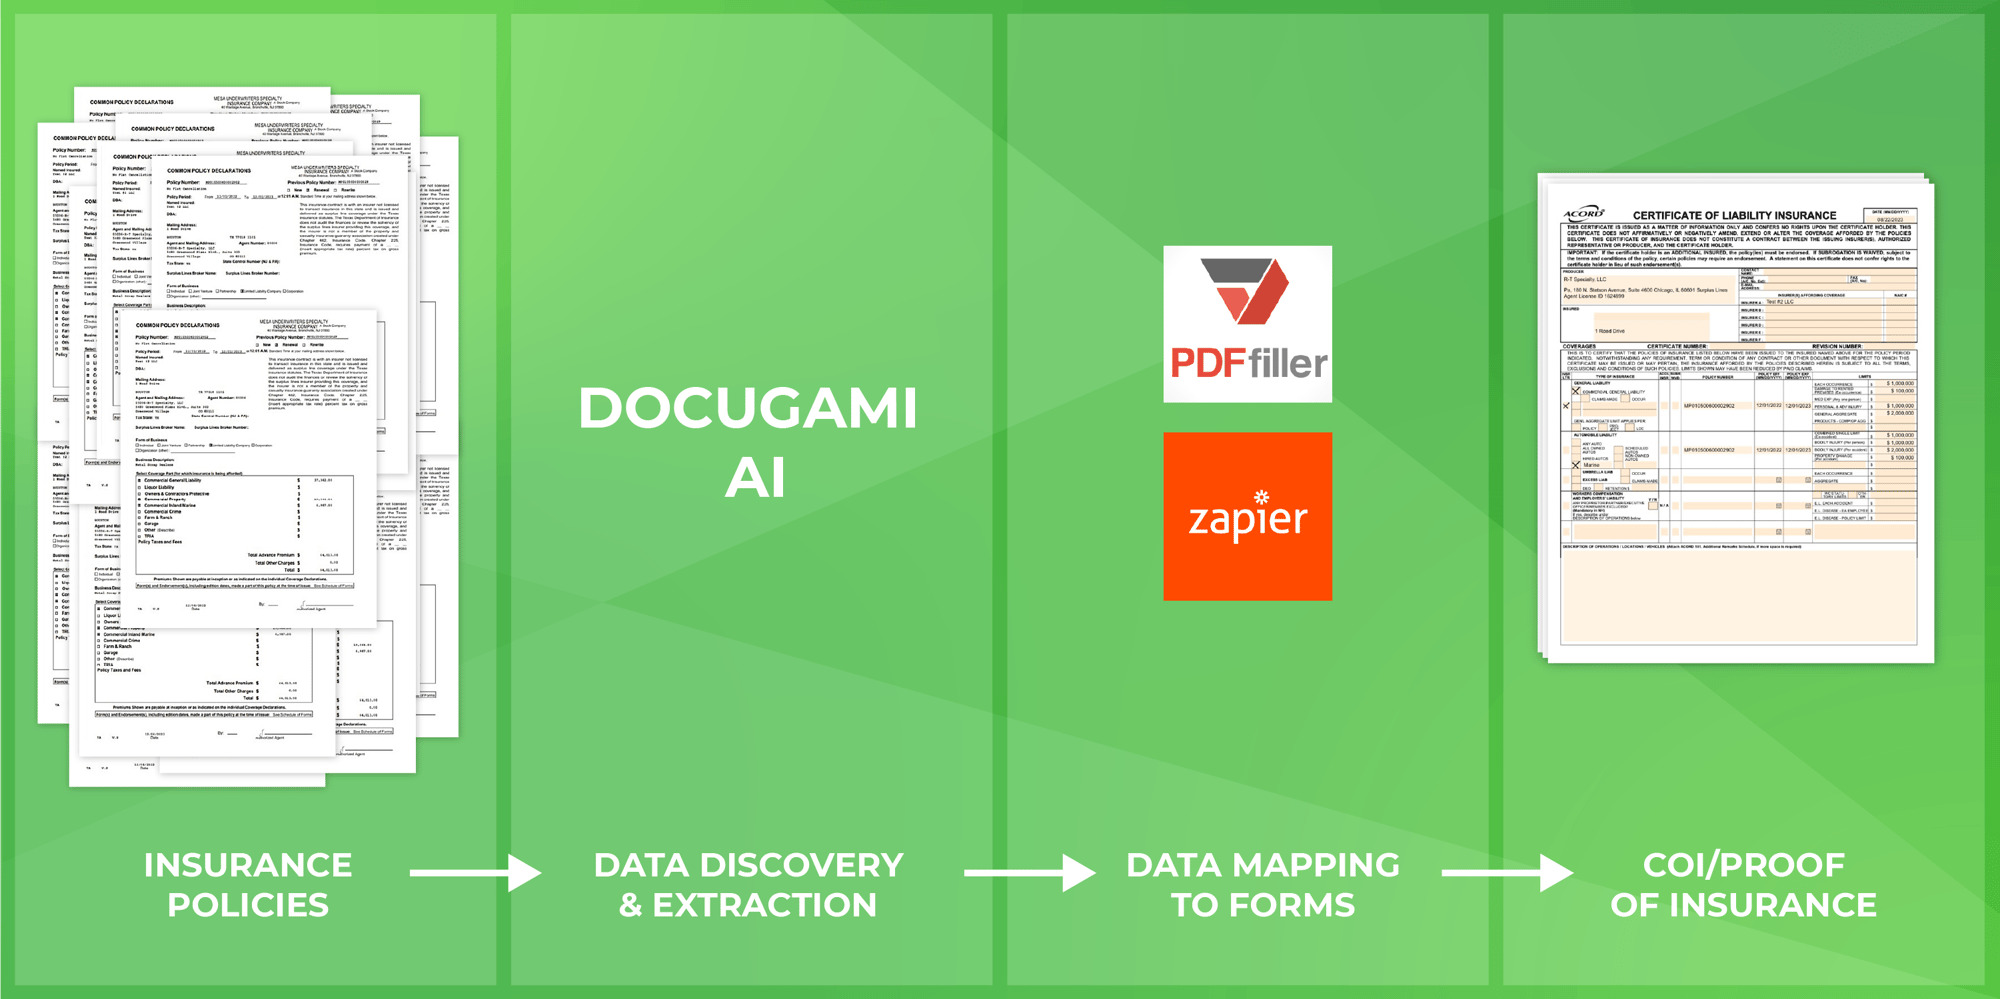 A process diagram showing how Docugami AI for Business Documents extracts data from complex commercial insurance documents and makes all the data available for business processes to automatically create Certificates of Insurance (COI).